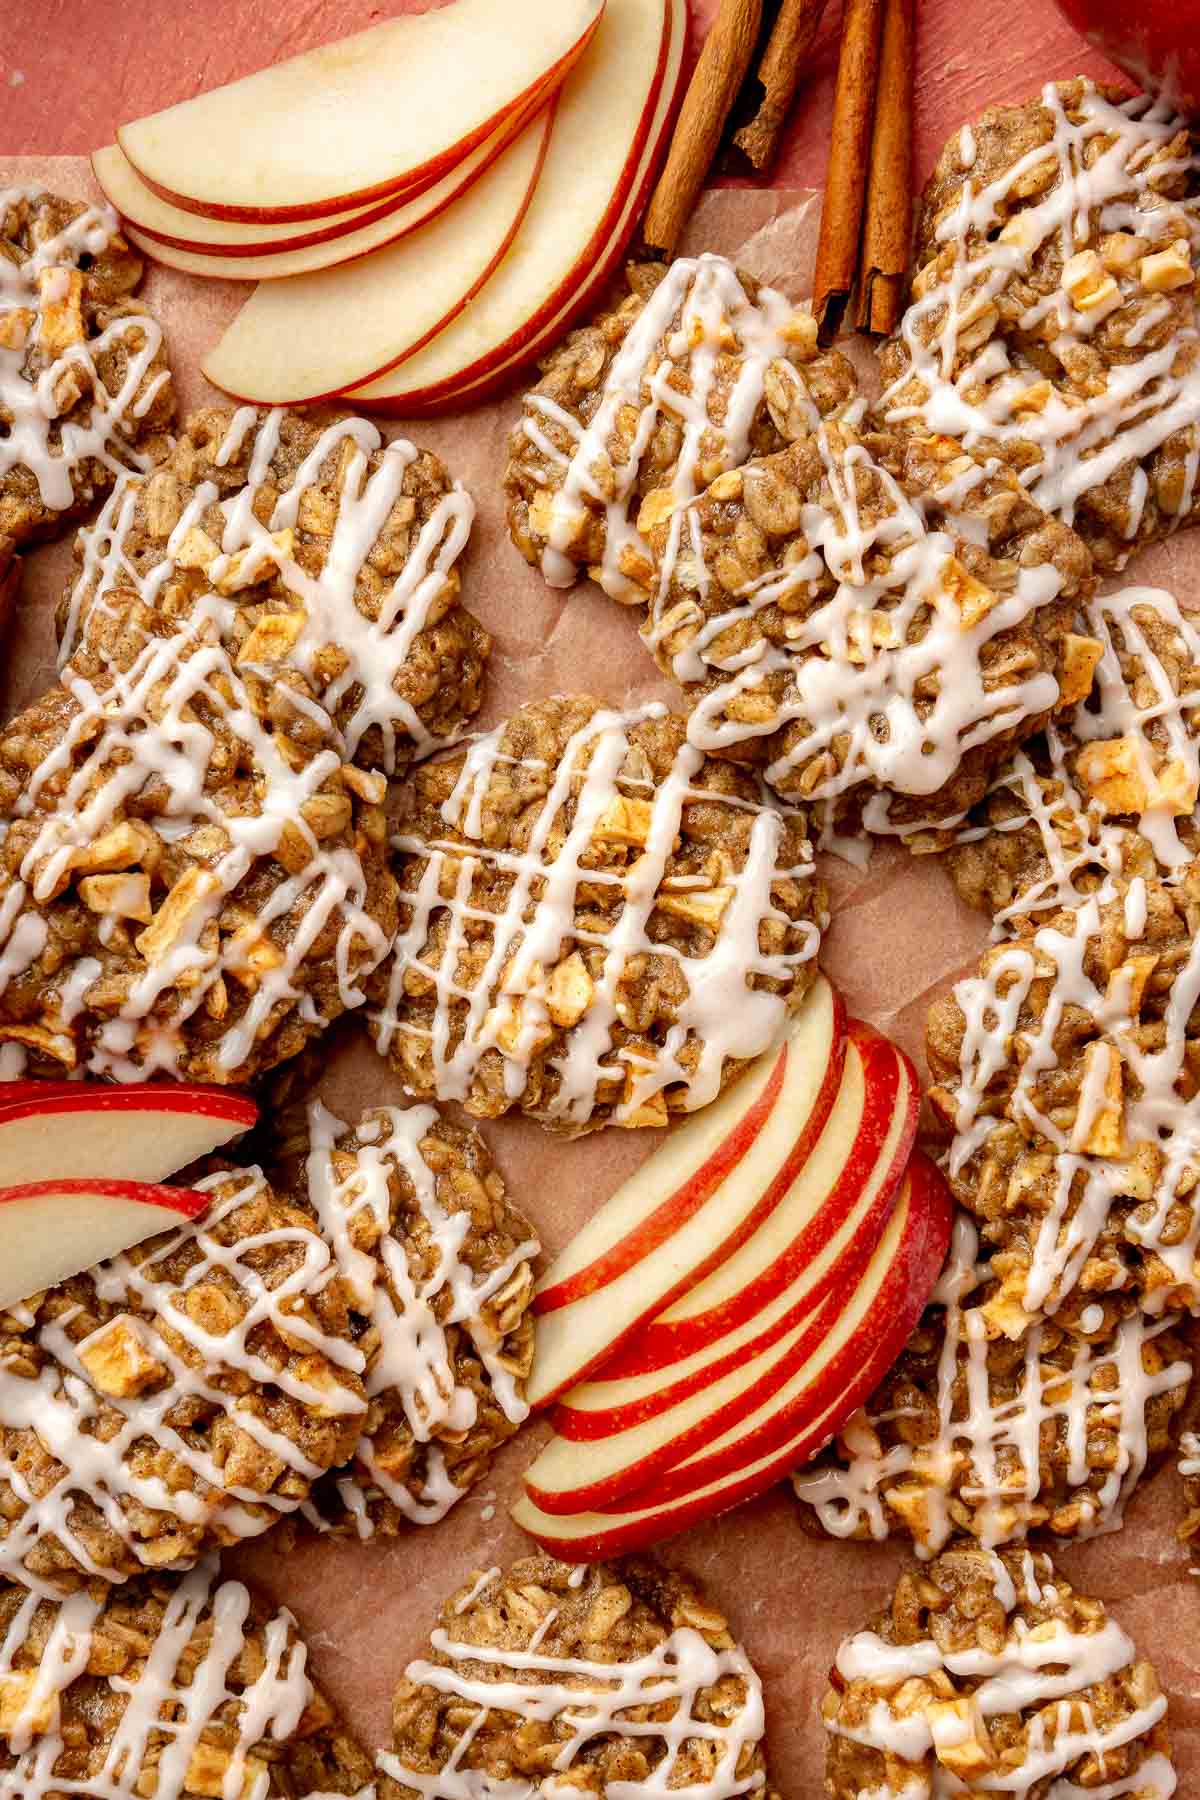 Apple oatmeal cookies drizzled with icing.